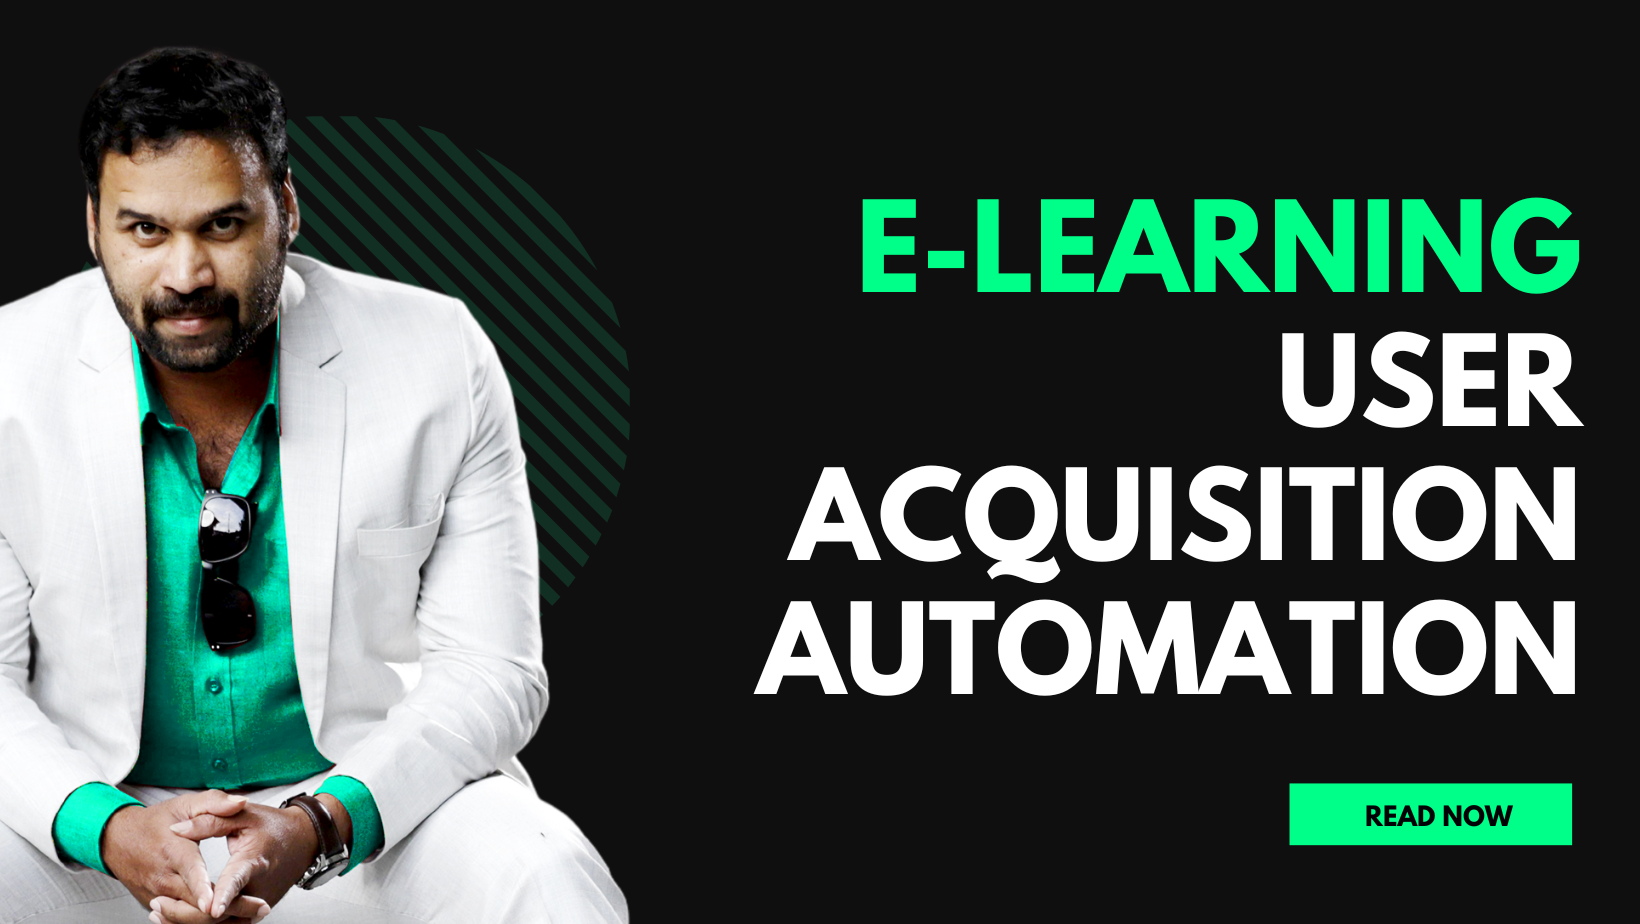 E-Learning User Acquisition Automation